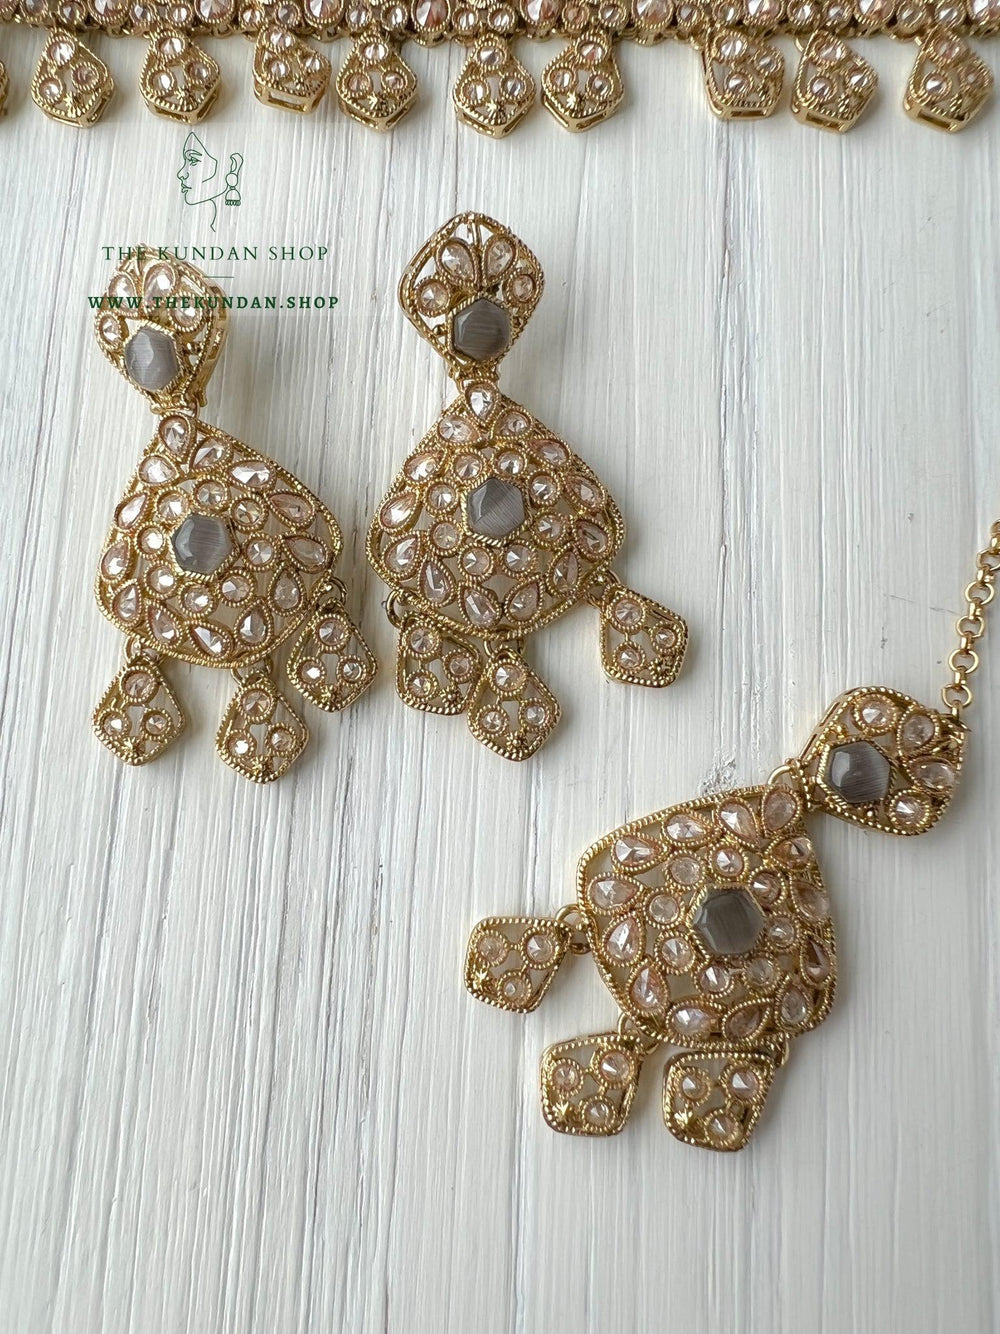 Curious in Grey Necklace Sets THE KUNDAN SHOP 